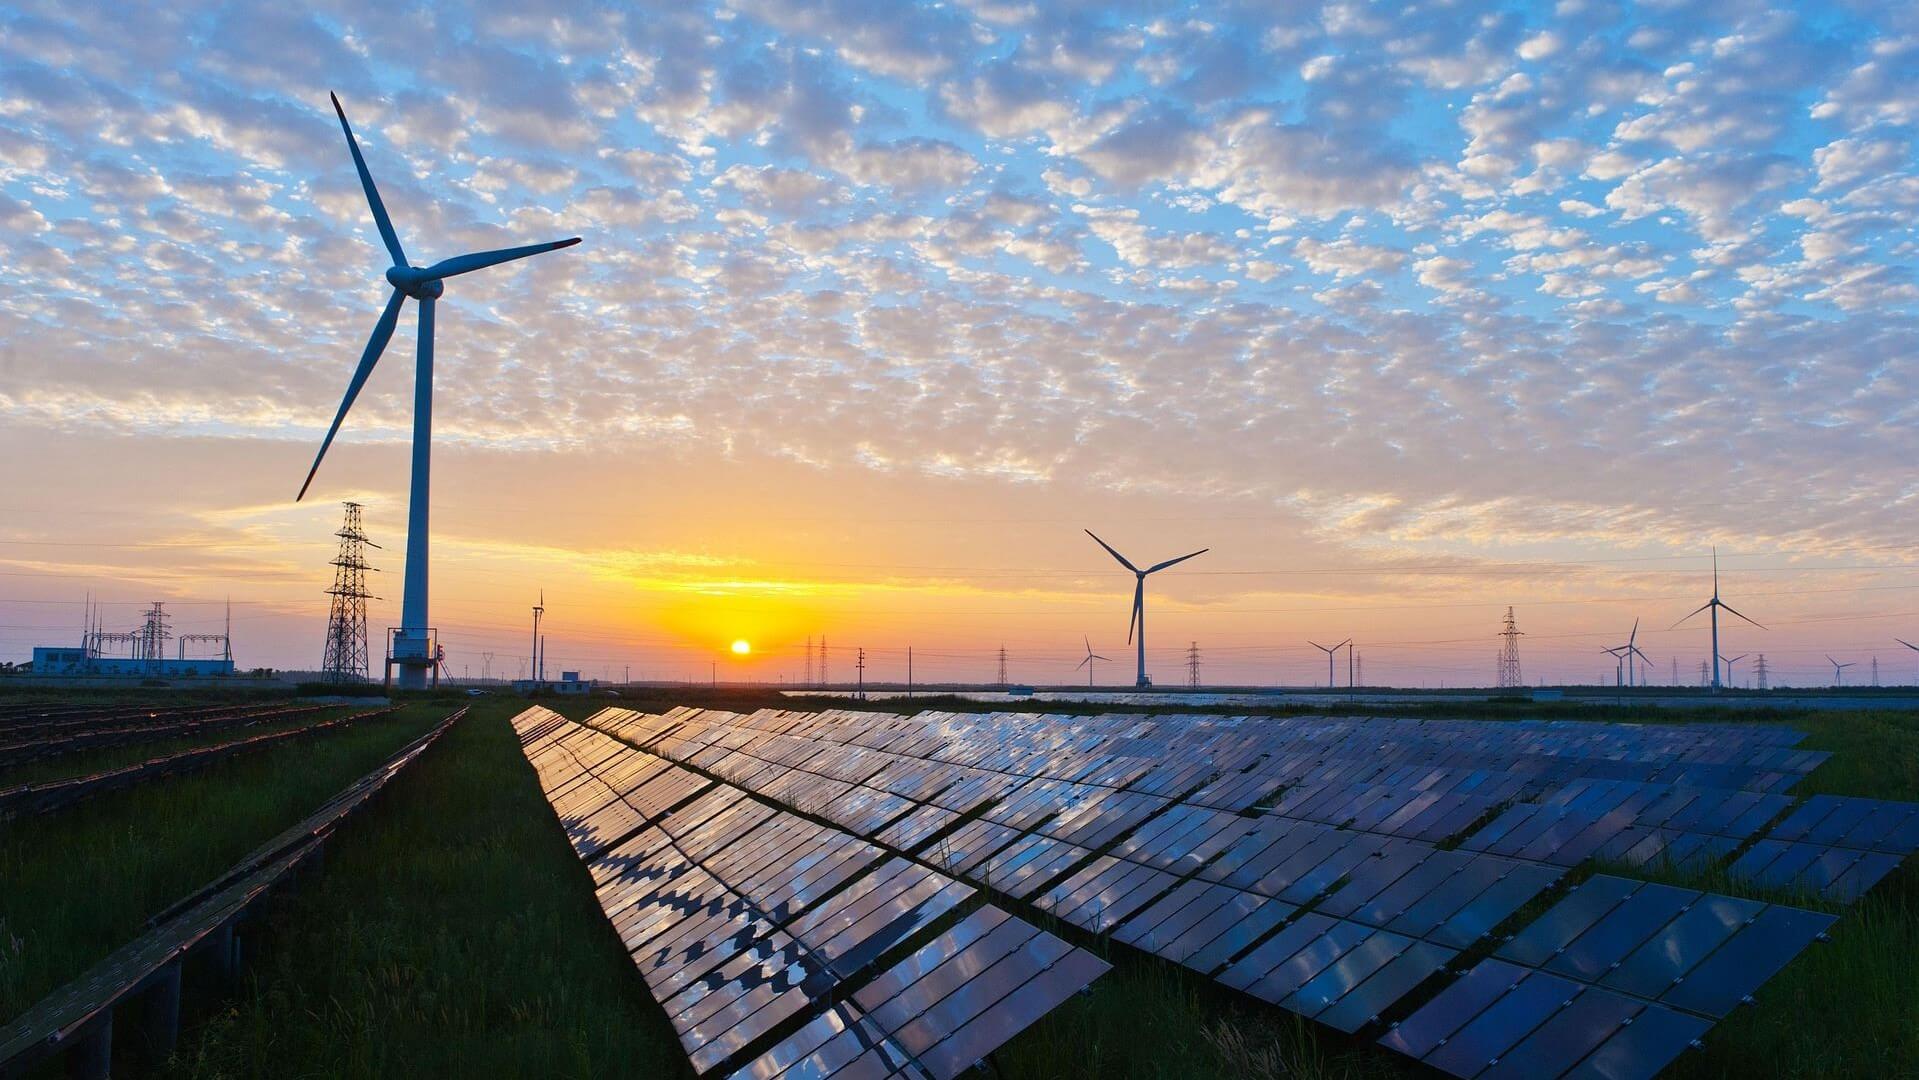 Solar panels in foreground, wind turbines in mid and background, set against sunrise sky